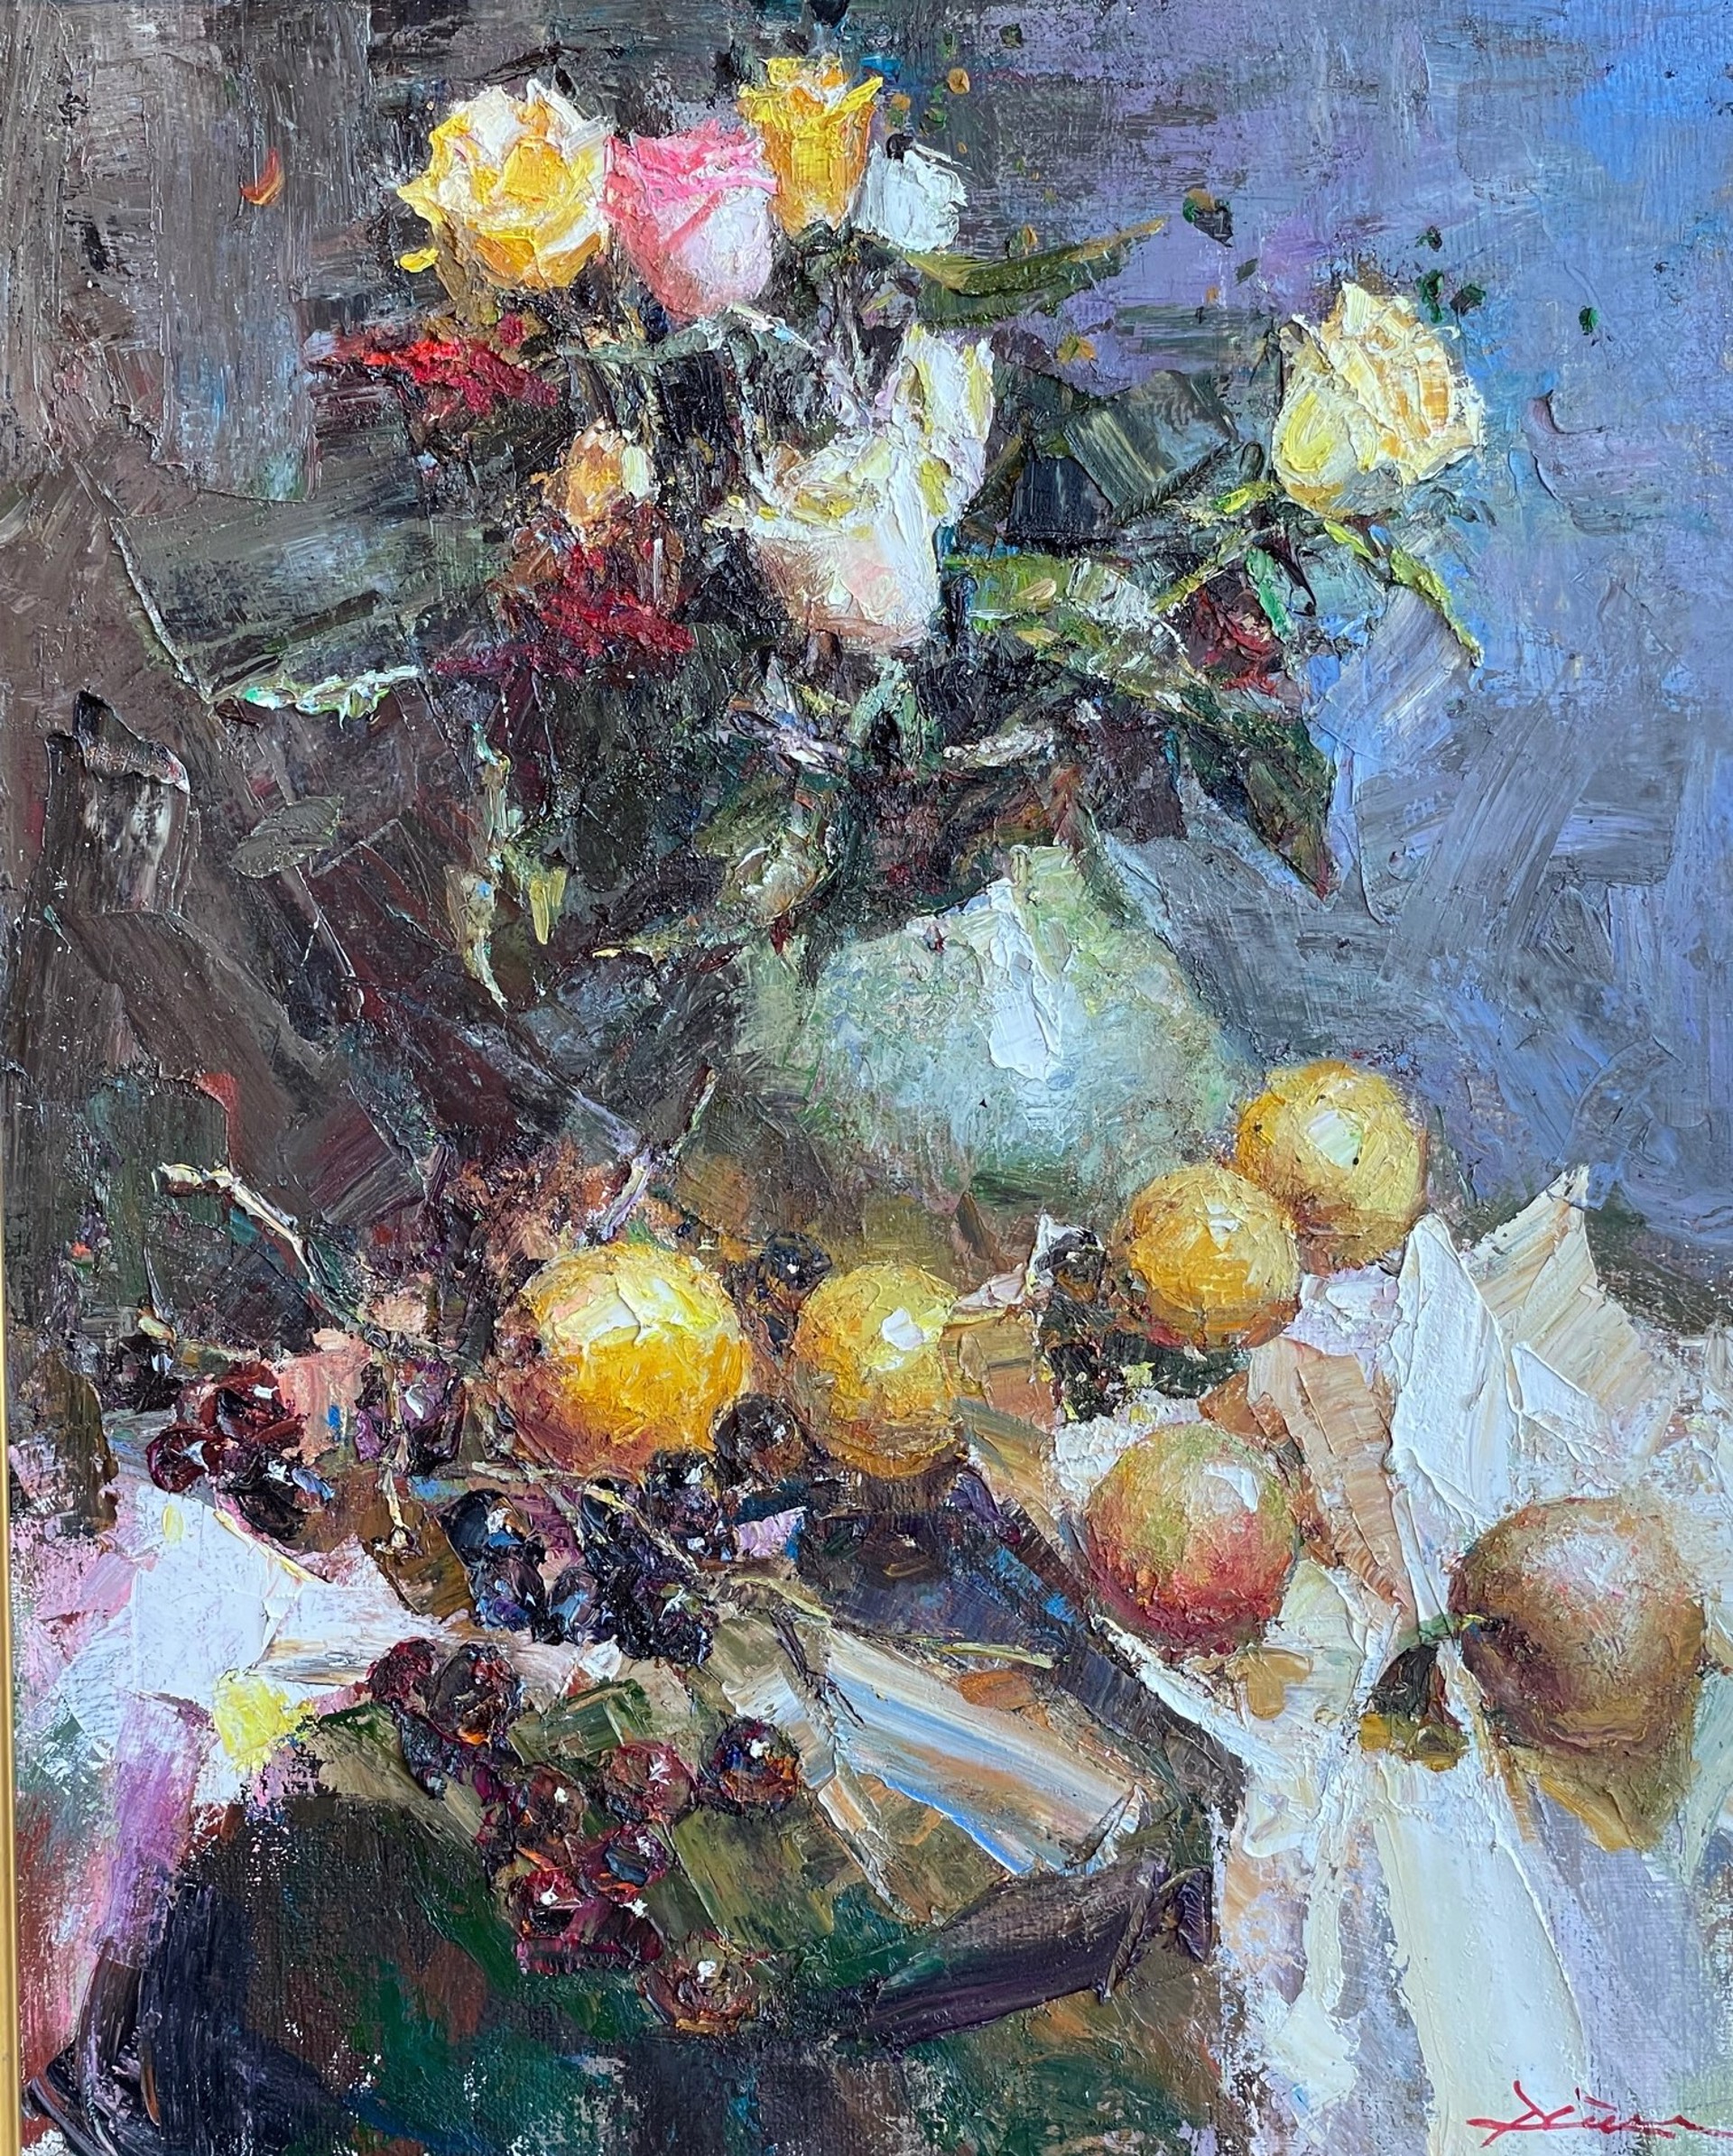 Apples & Oranges by Piao Xue Cheng